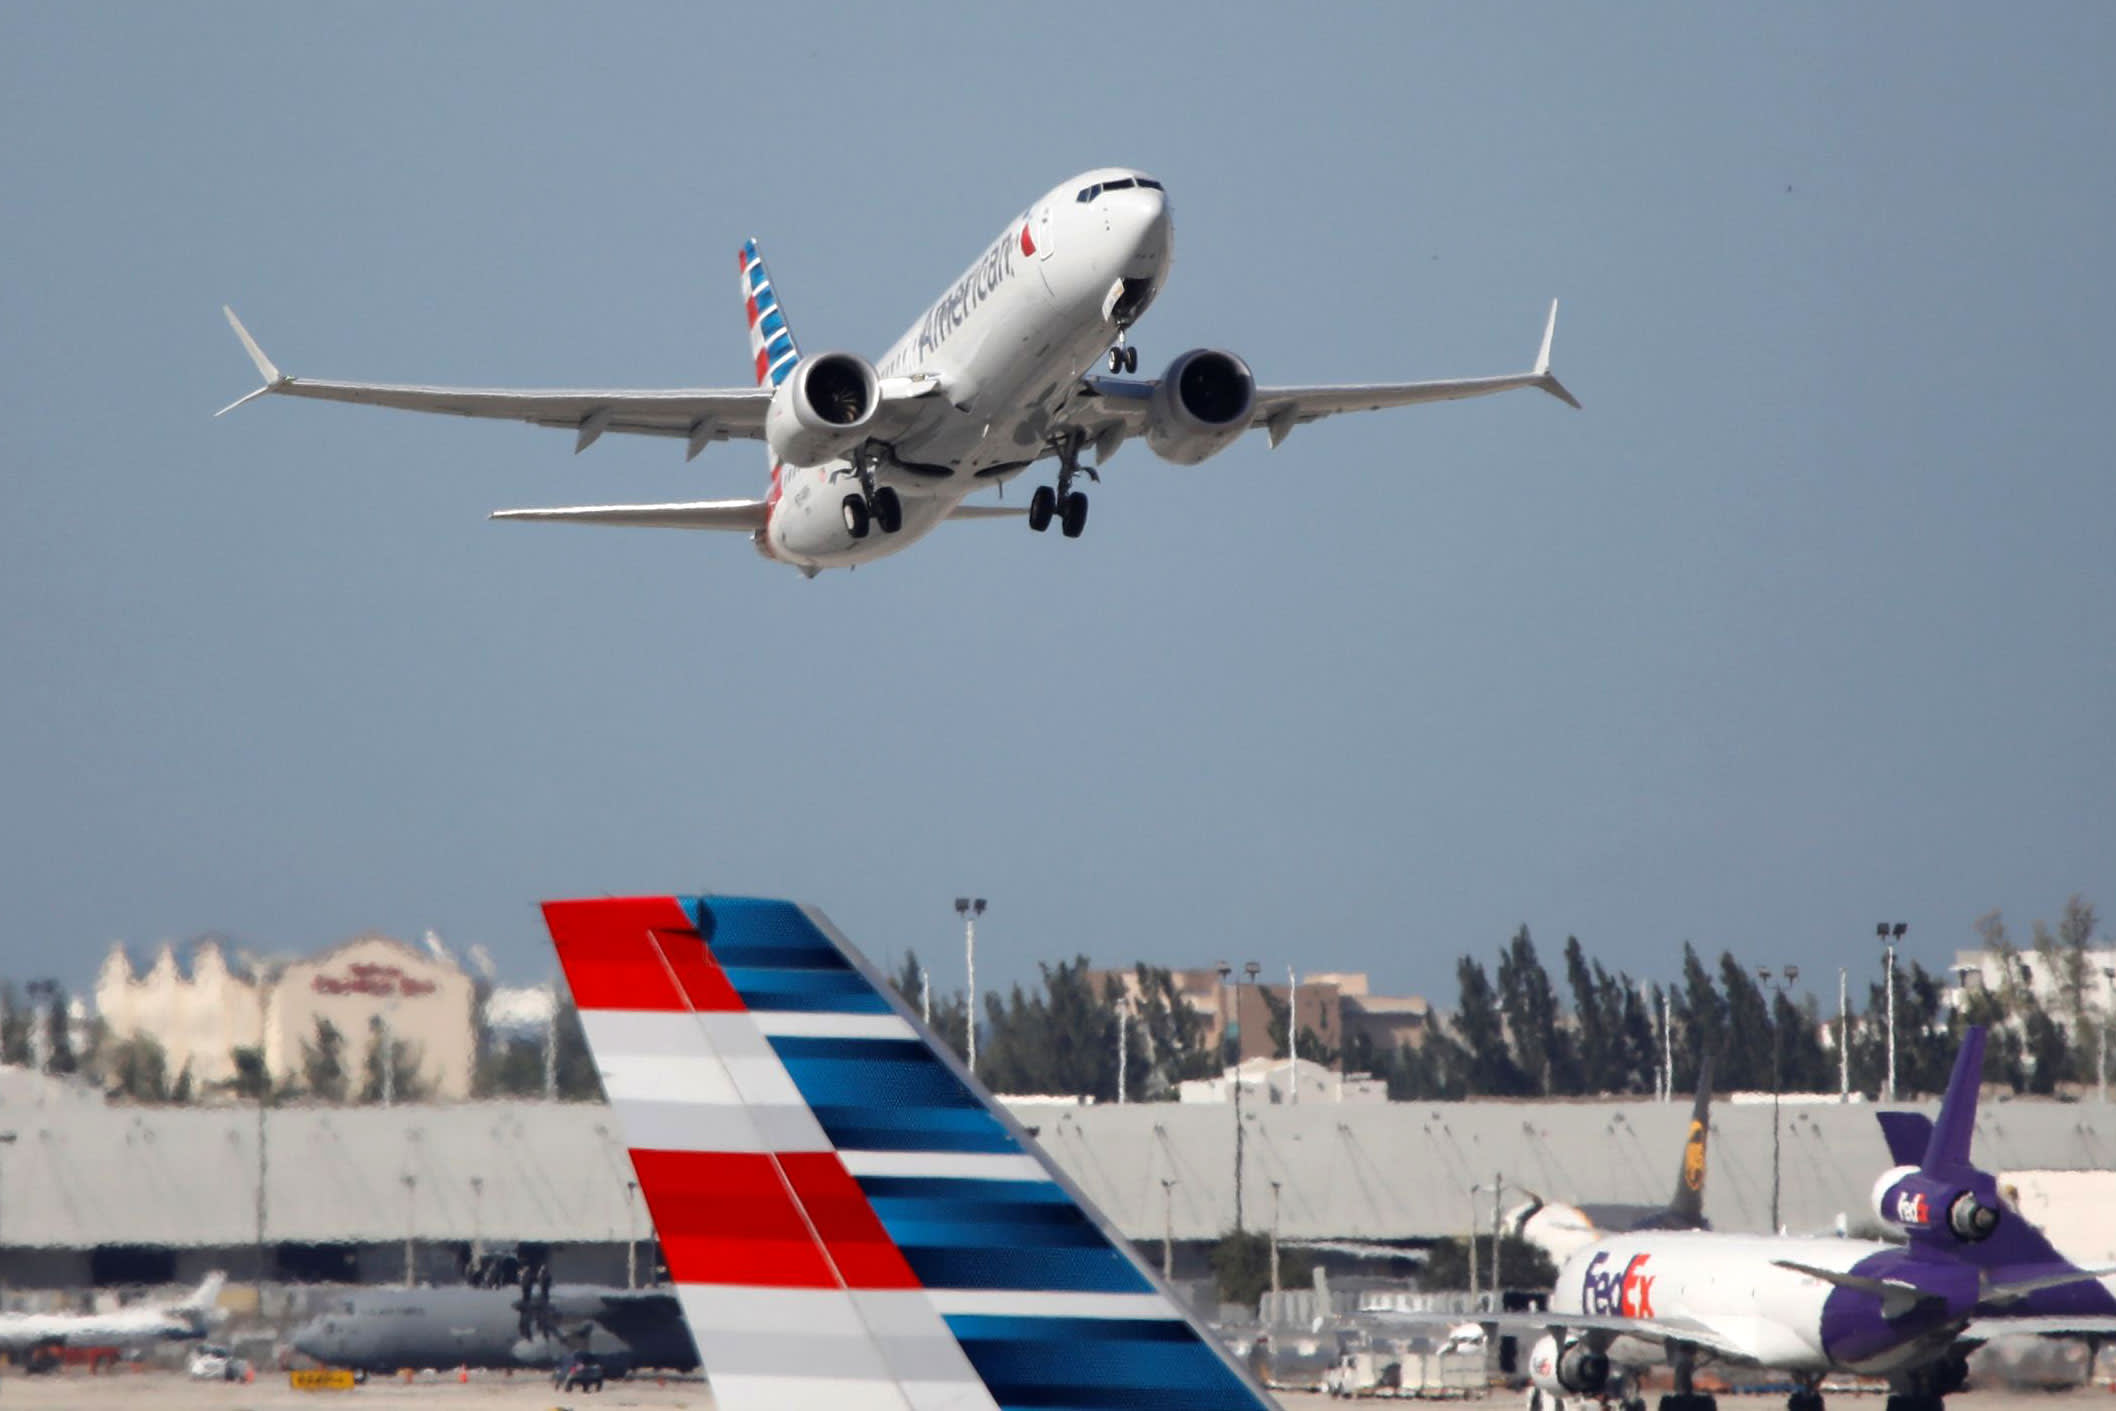 American Airlines plans another $ 1 billion share sale after big rally